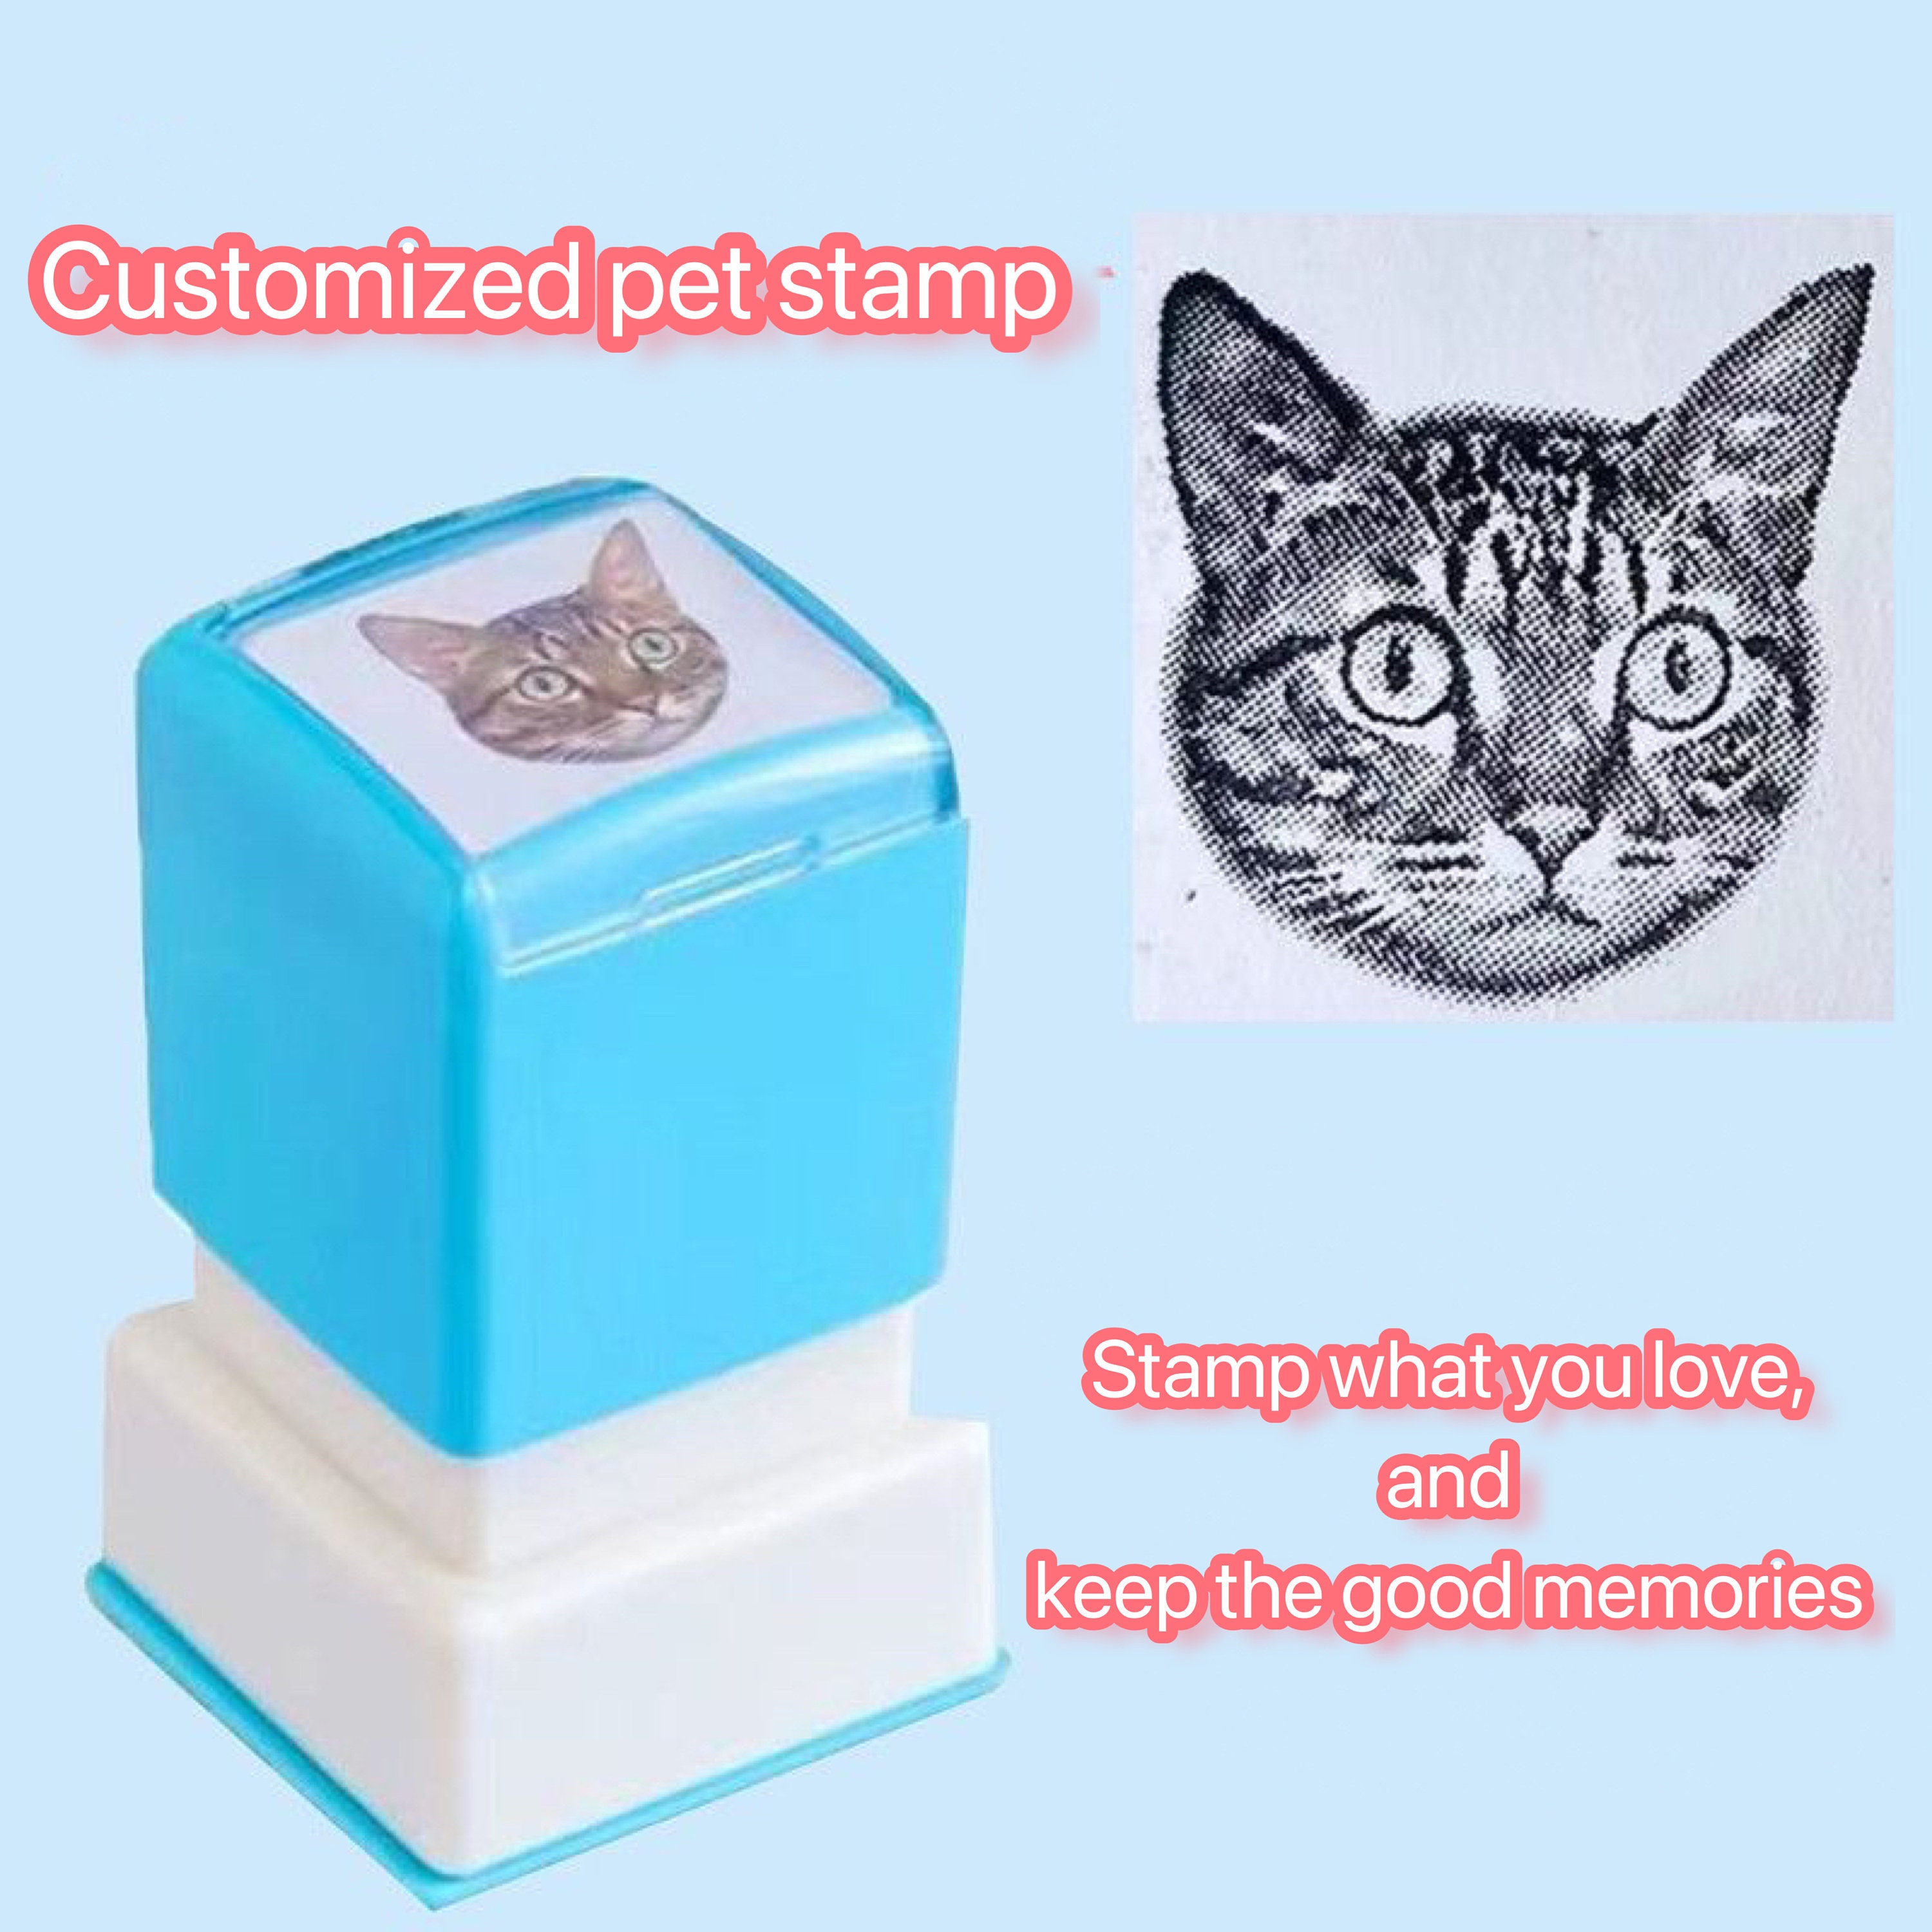 Catcus Cactus Cat Pun Self-Inking Rubber Stamp Ink Stamper - Blue Ink -  Small 1 Inch 